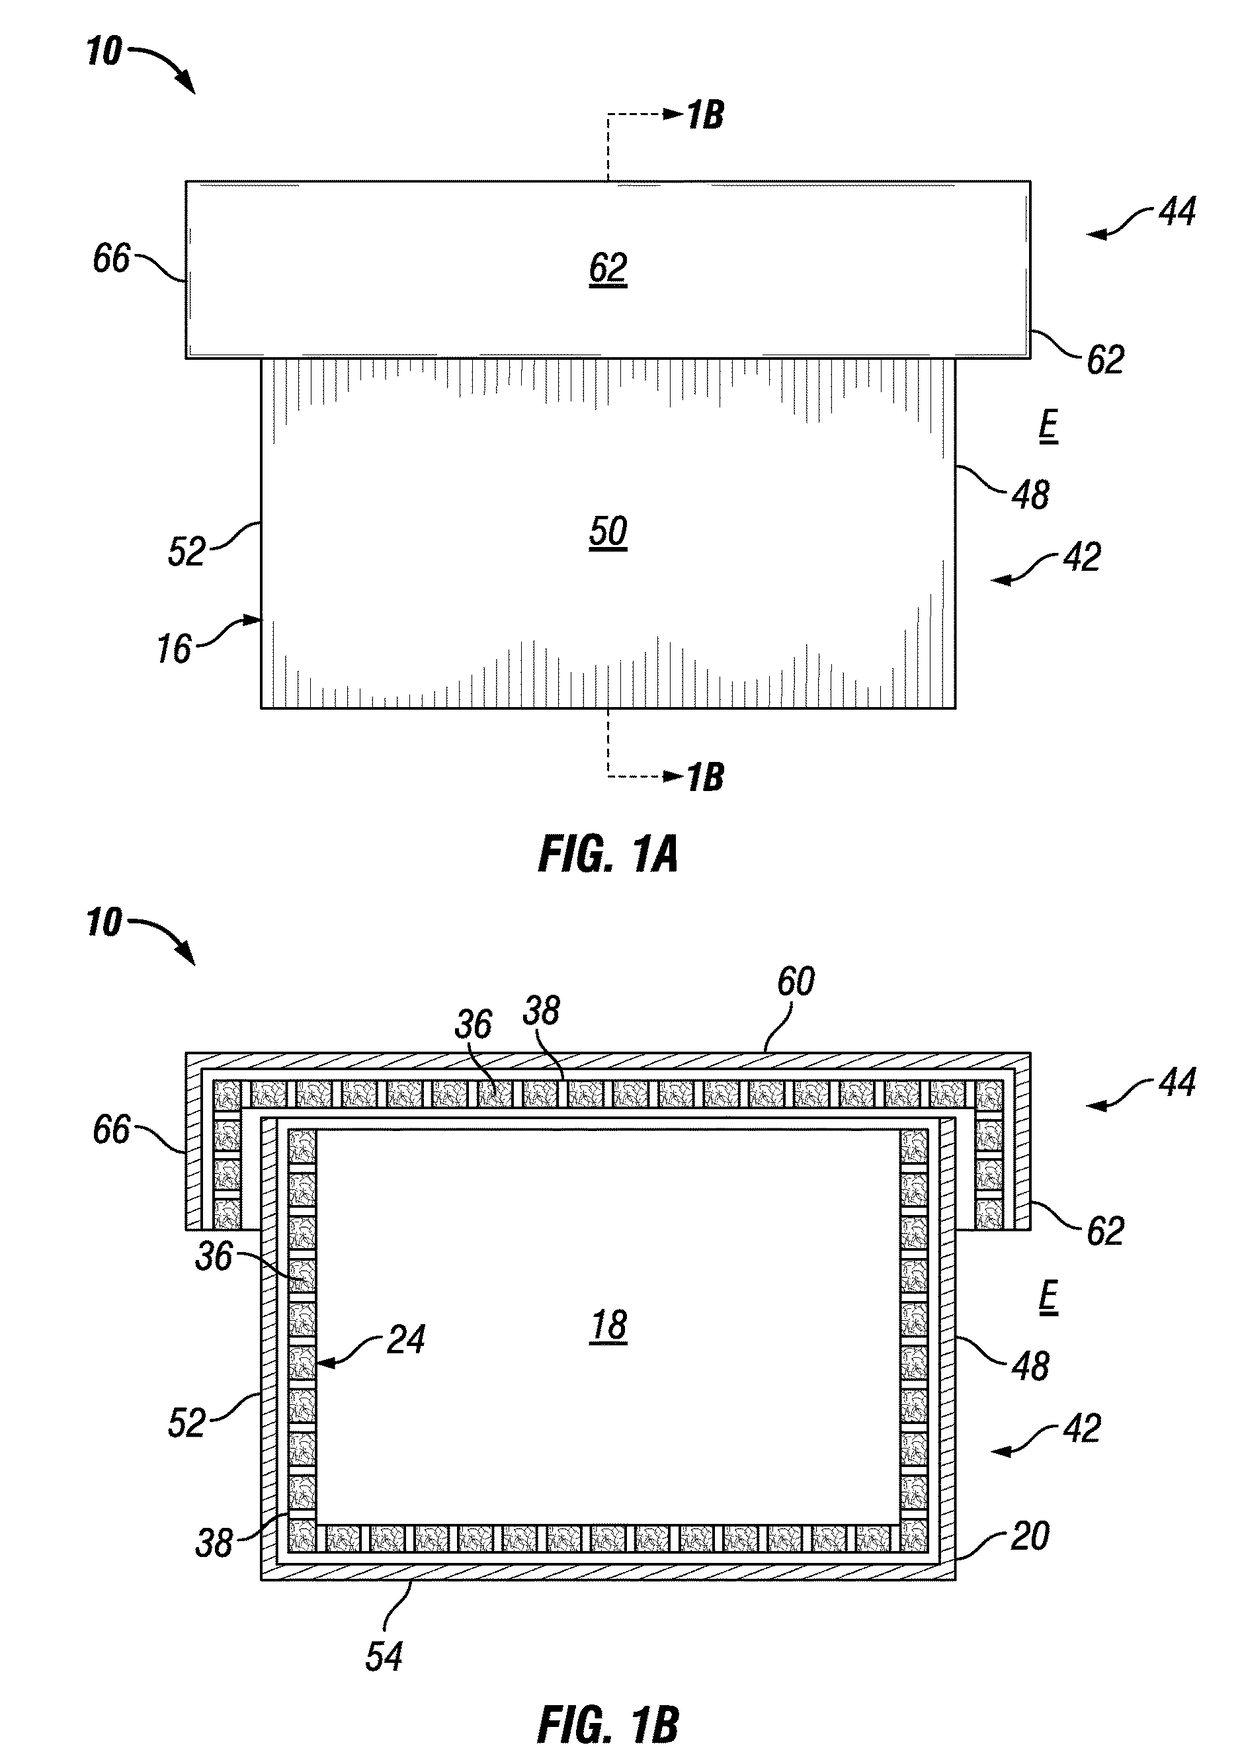 Shipping container having a flame retardant layer and a thermal blocking layer